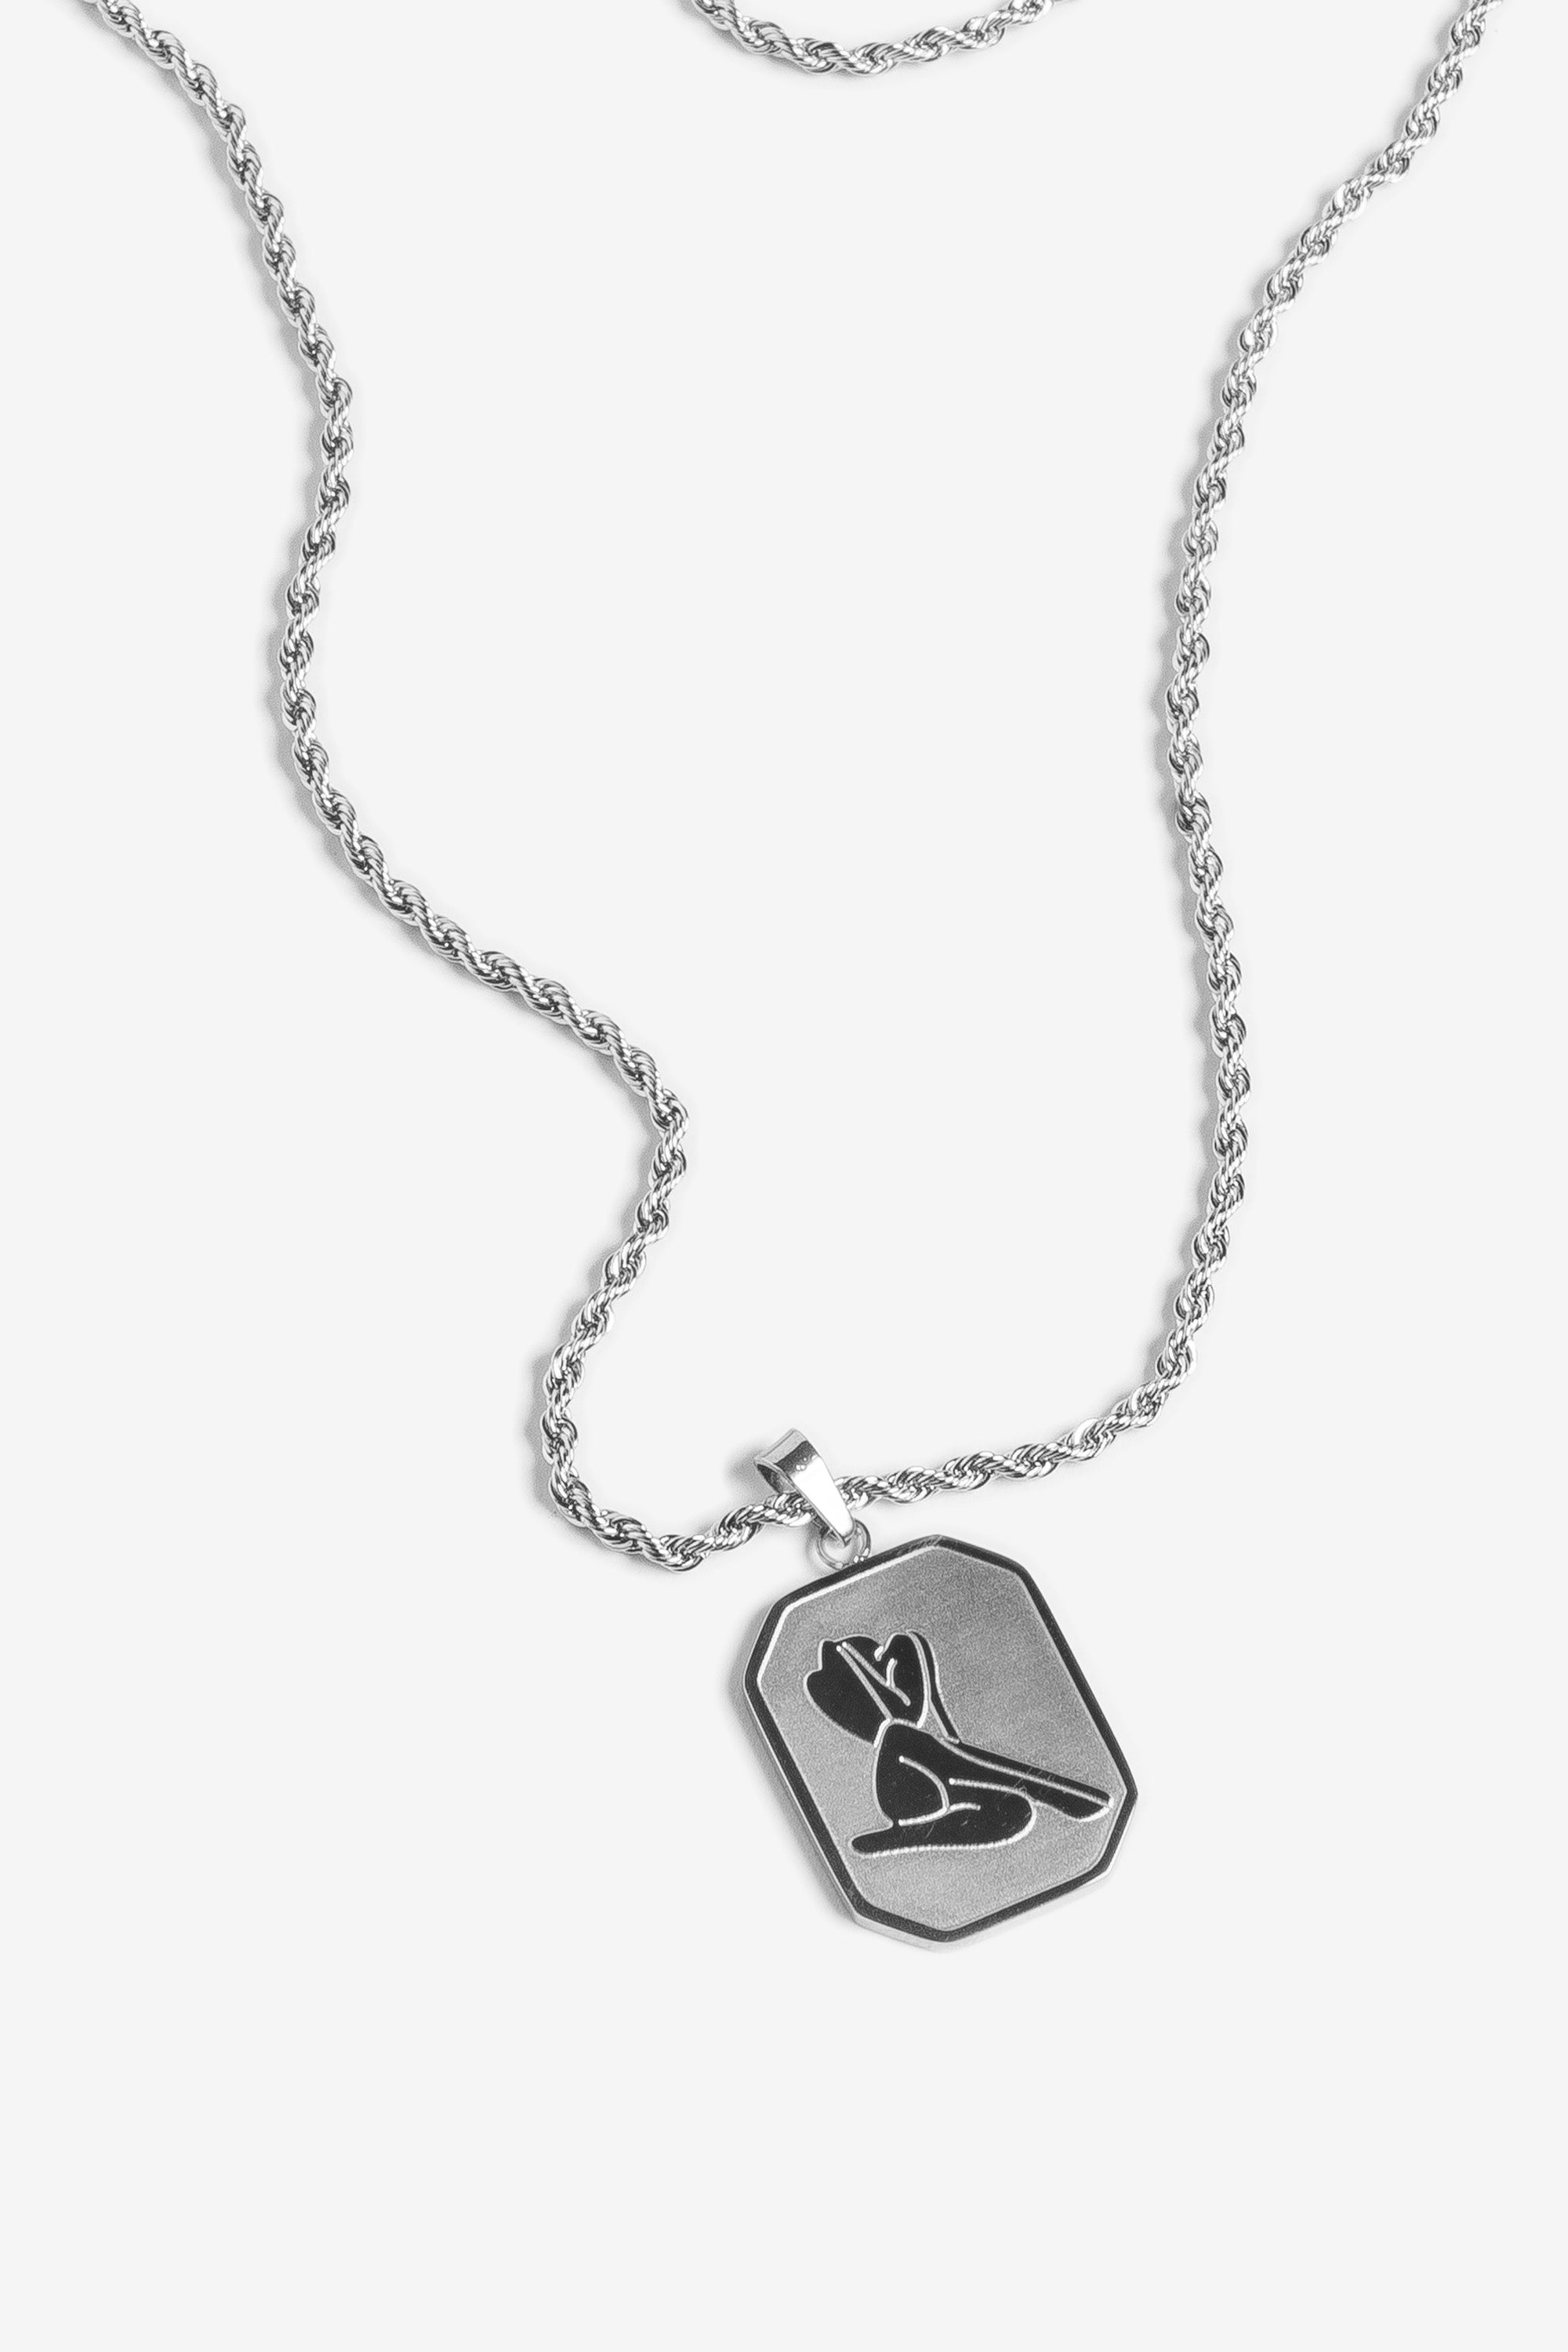 Image of a silver pendant necklace with a woman's figure on it on a white background